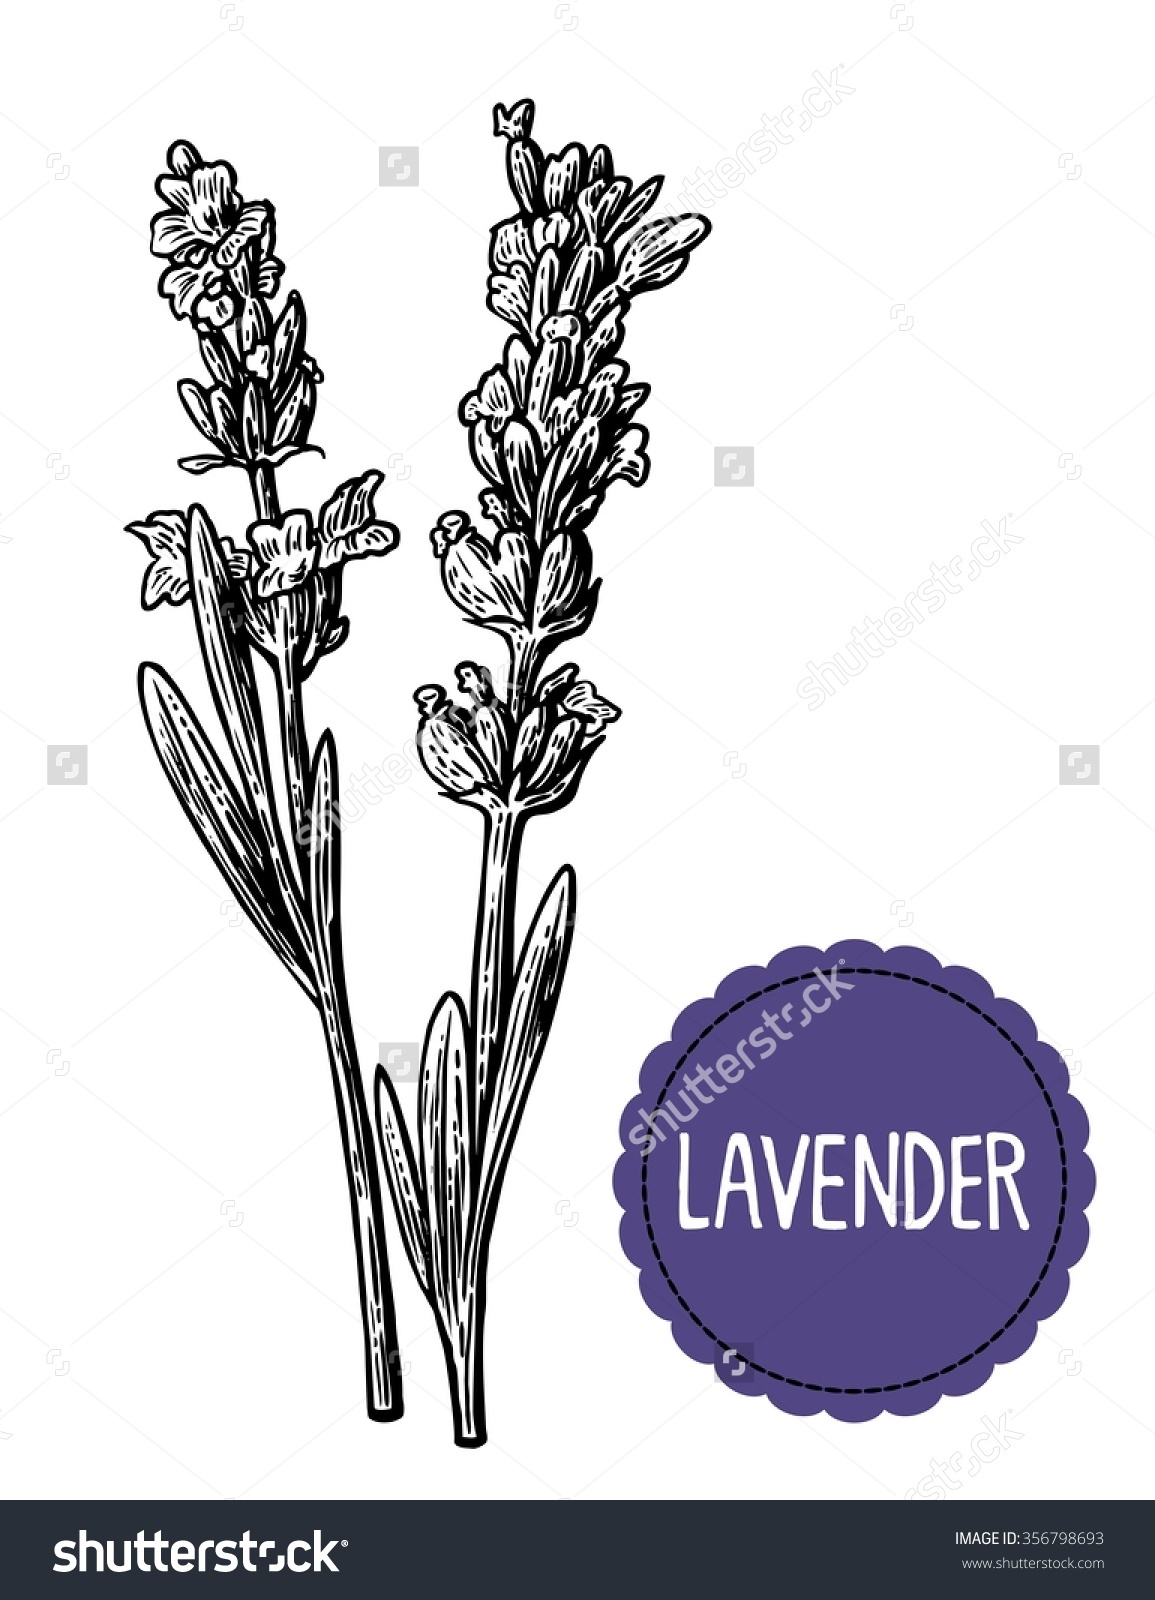 Whitish-lavender clipart - Clipground